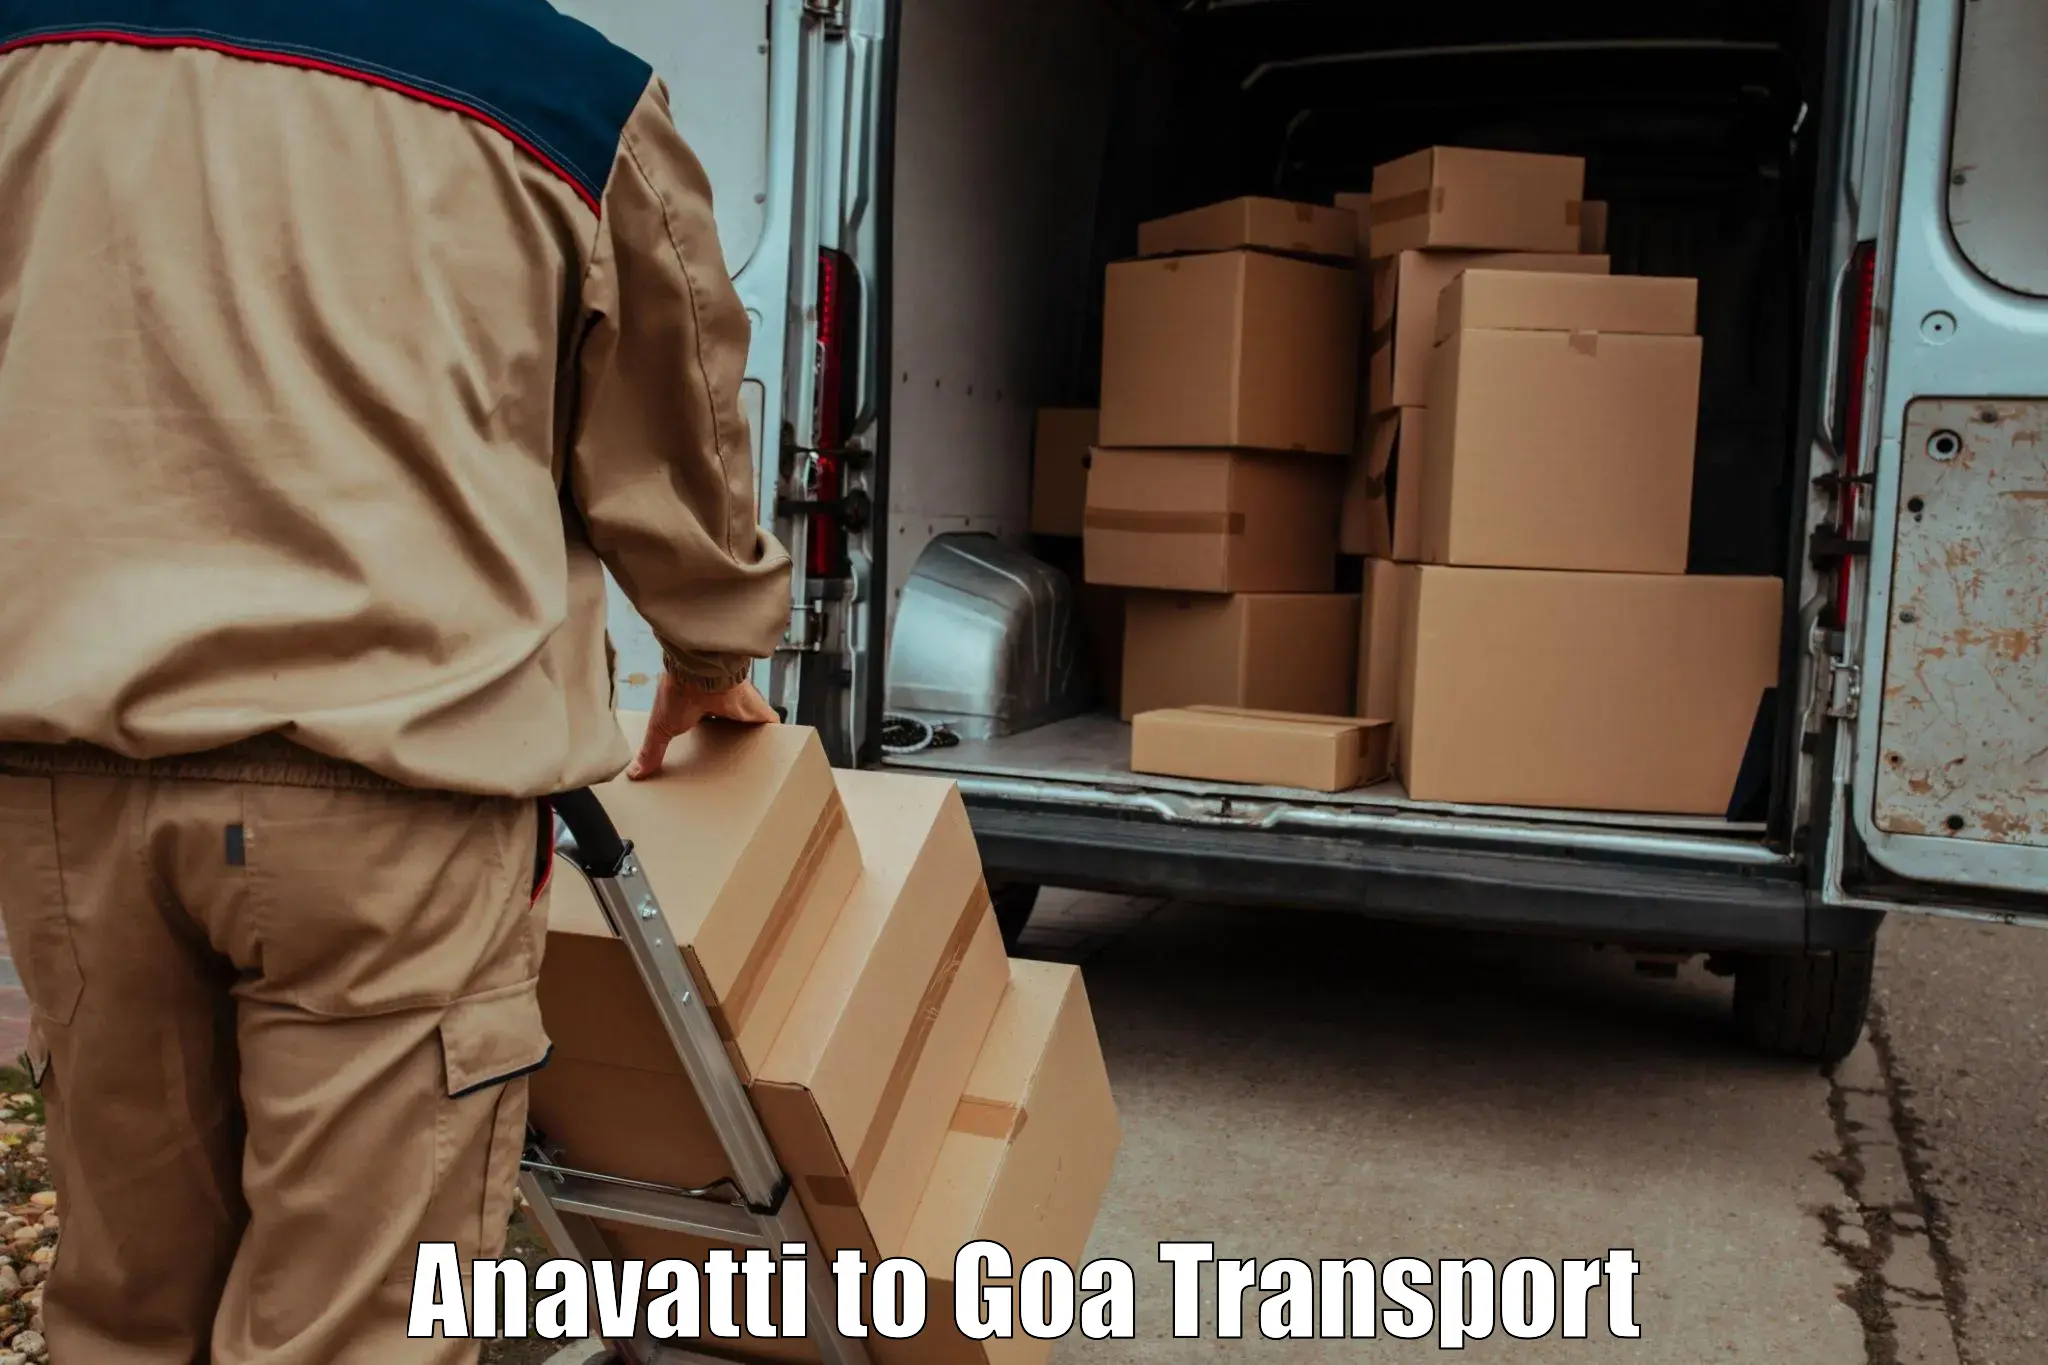 Luggage transport services in Anavatti to South Goa